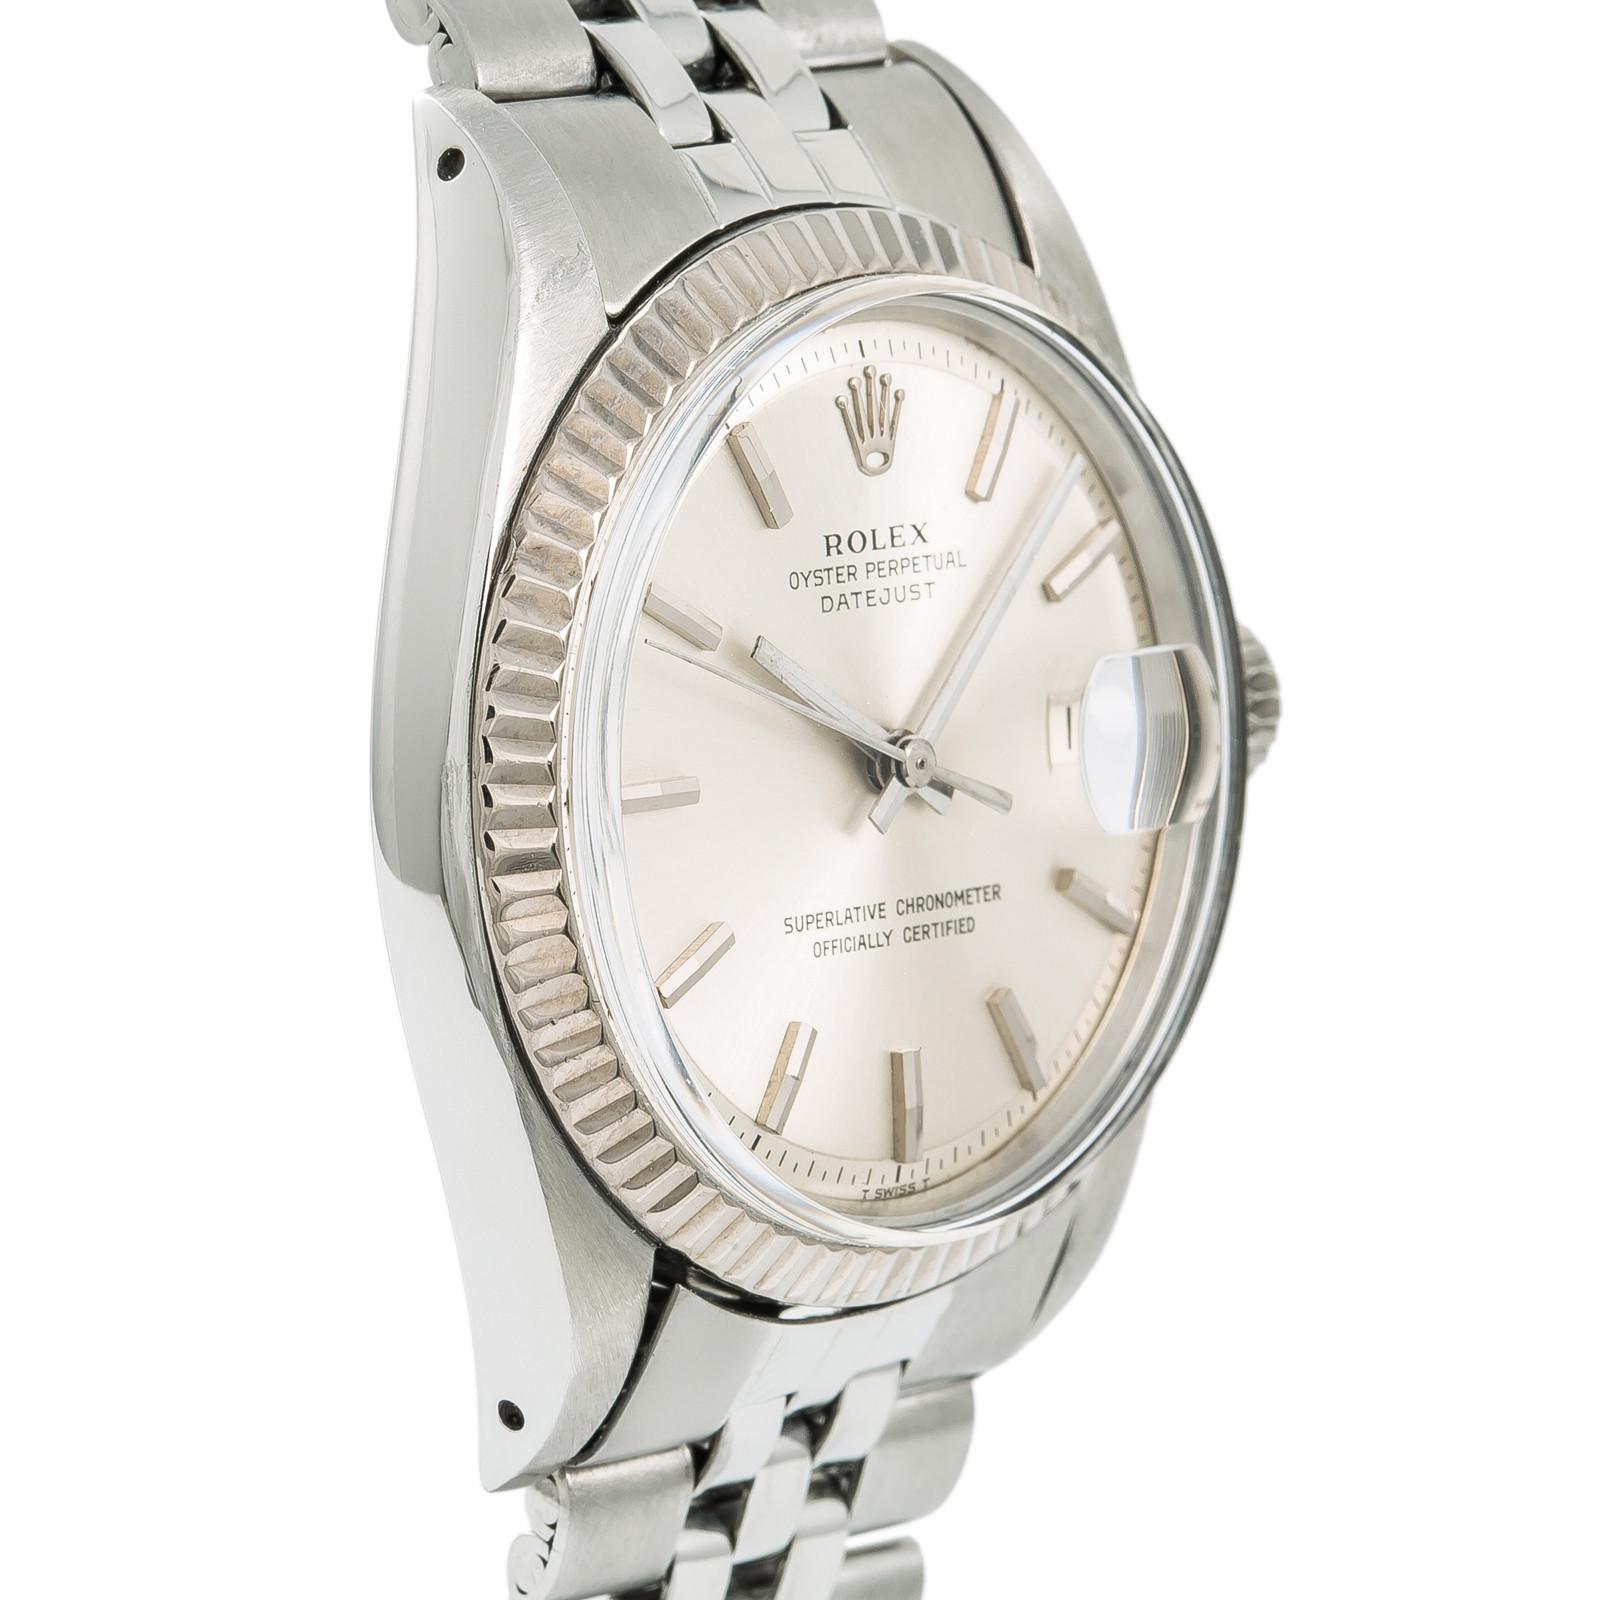 Rolex Datejust 1601, Dial Certified Authentic In Good Condition For Sale In Miami, FL